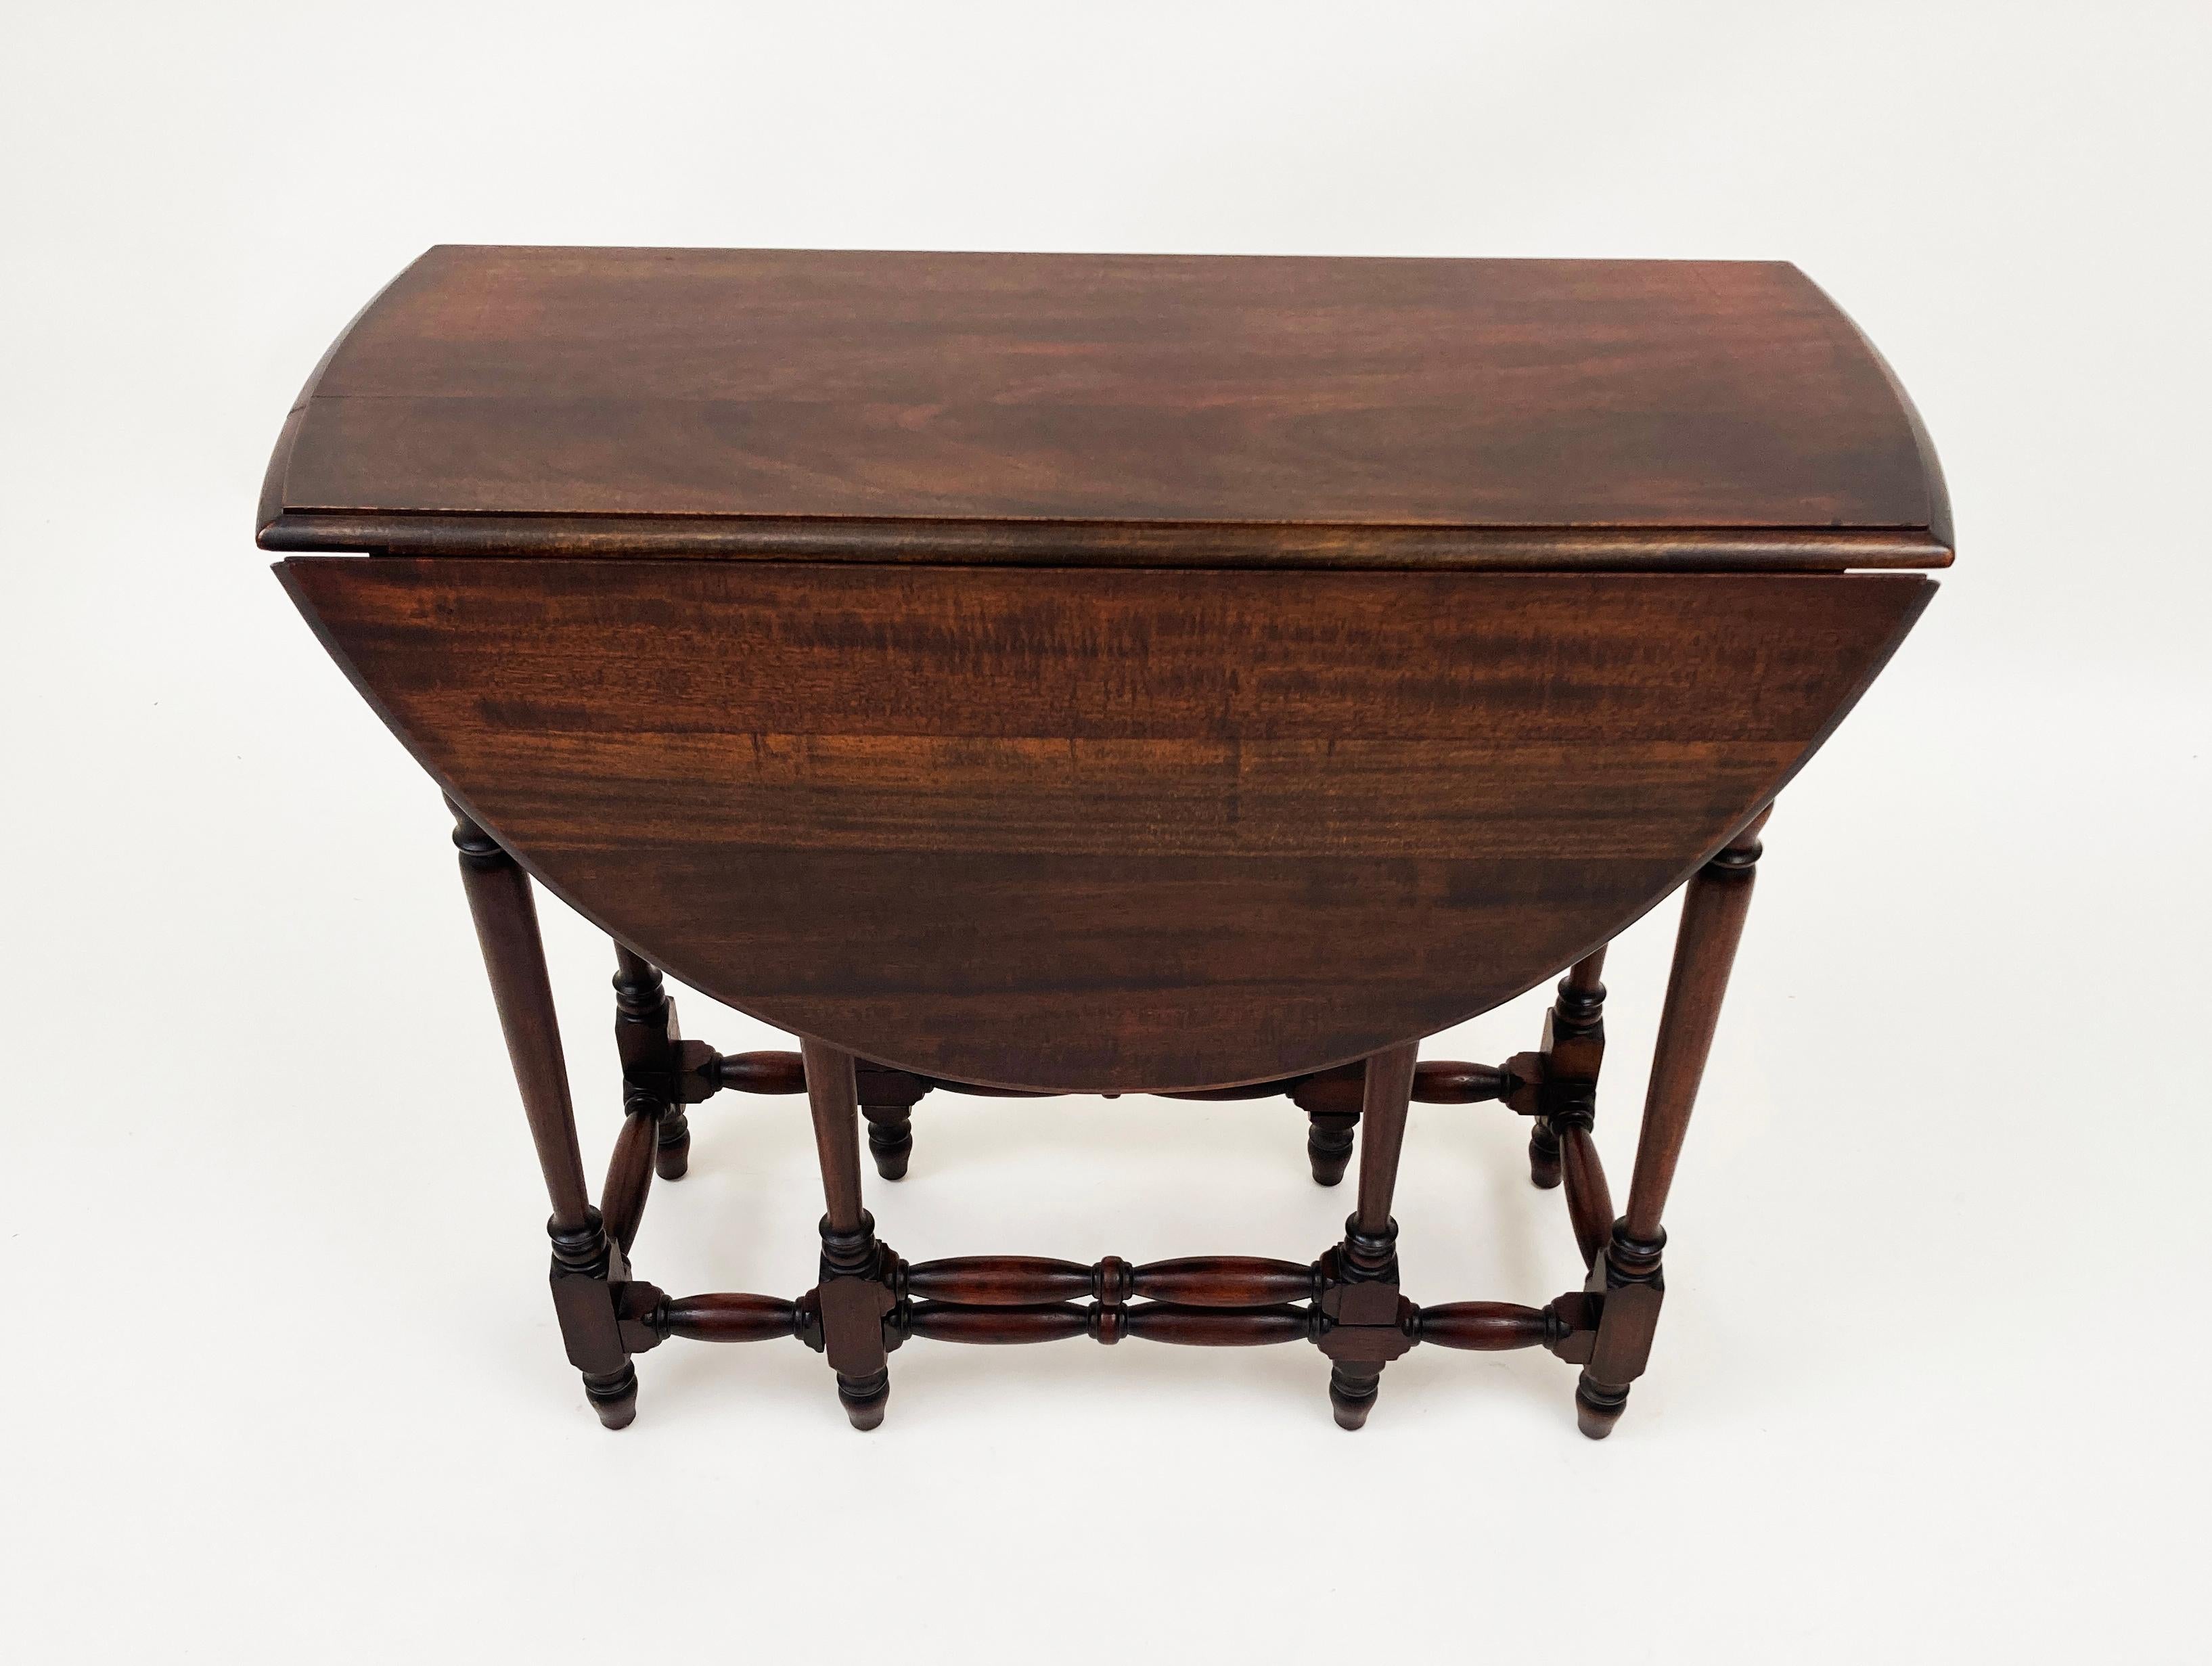 Late 18th Century English William and Mary Drop Leaf Gate-Leg Walnut Table For Sale 1